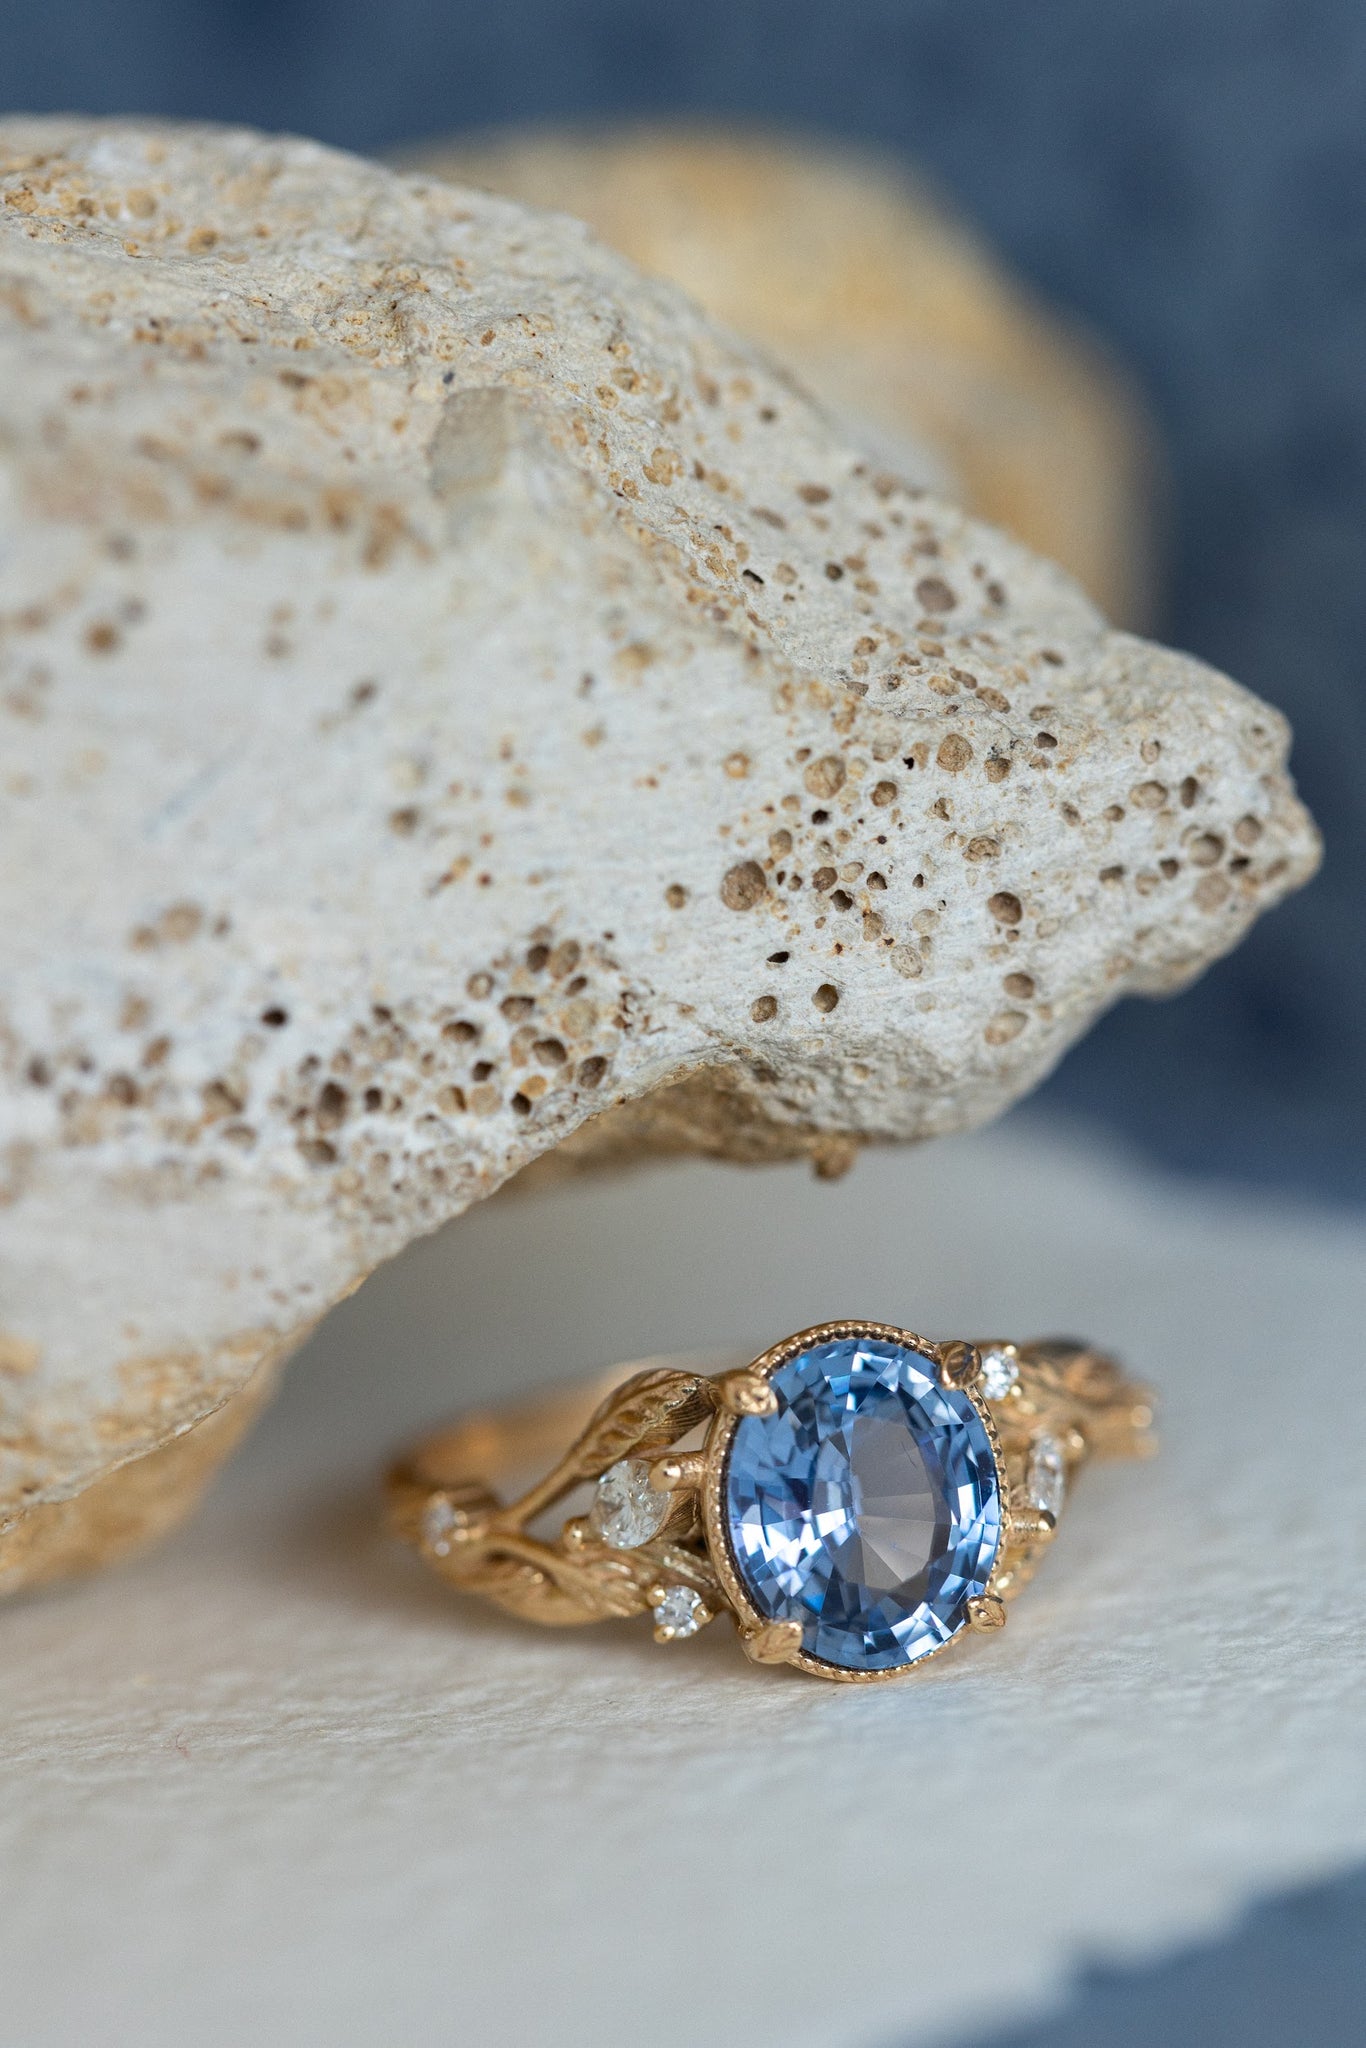 READY TO SHIP: Patricia ring set in 14K yellow gold, natural sapphire oval cut 8x6* mm, accent natural diamonds, AVAILABLE RING SIZES: 6-8US - Eden Garden Jewelry™